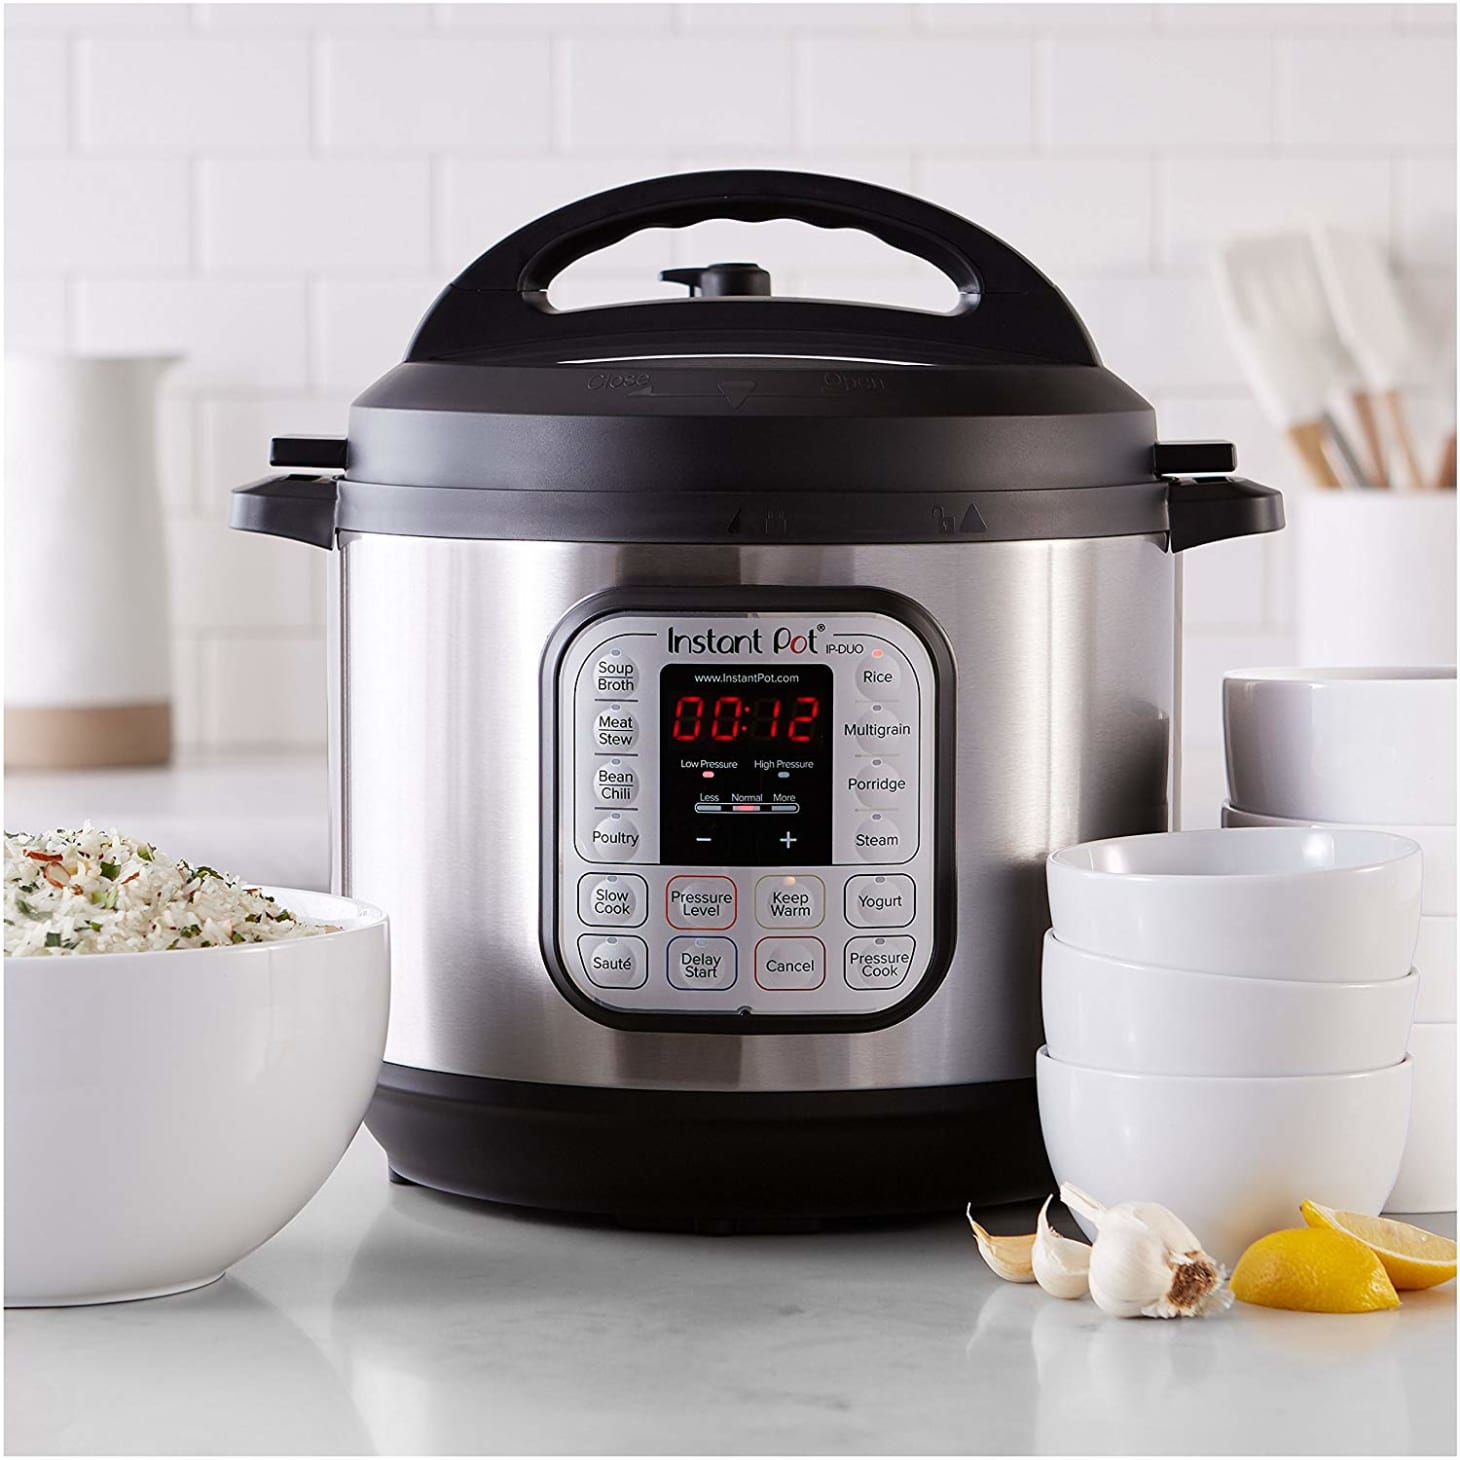 Amazon Black Friday Instant Pot 8 Quart Deal Of The Day | Kitchn